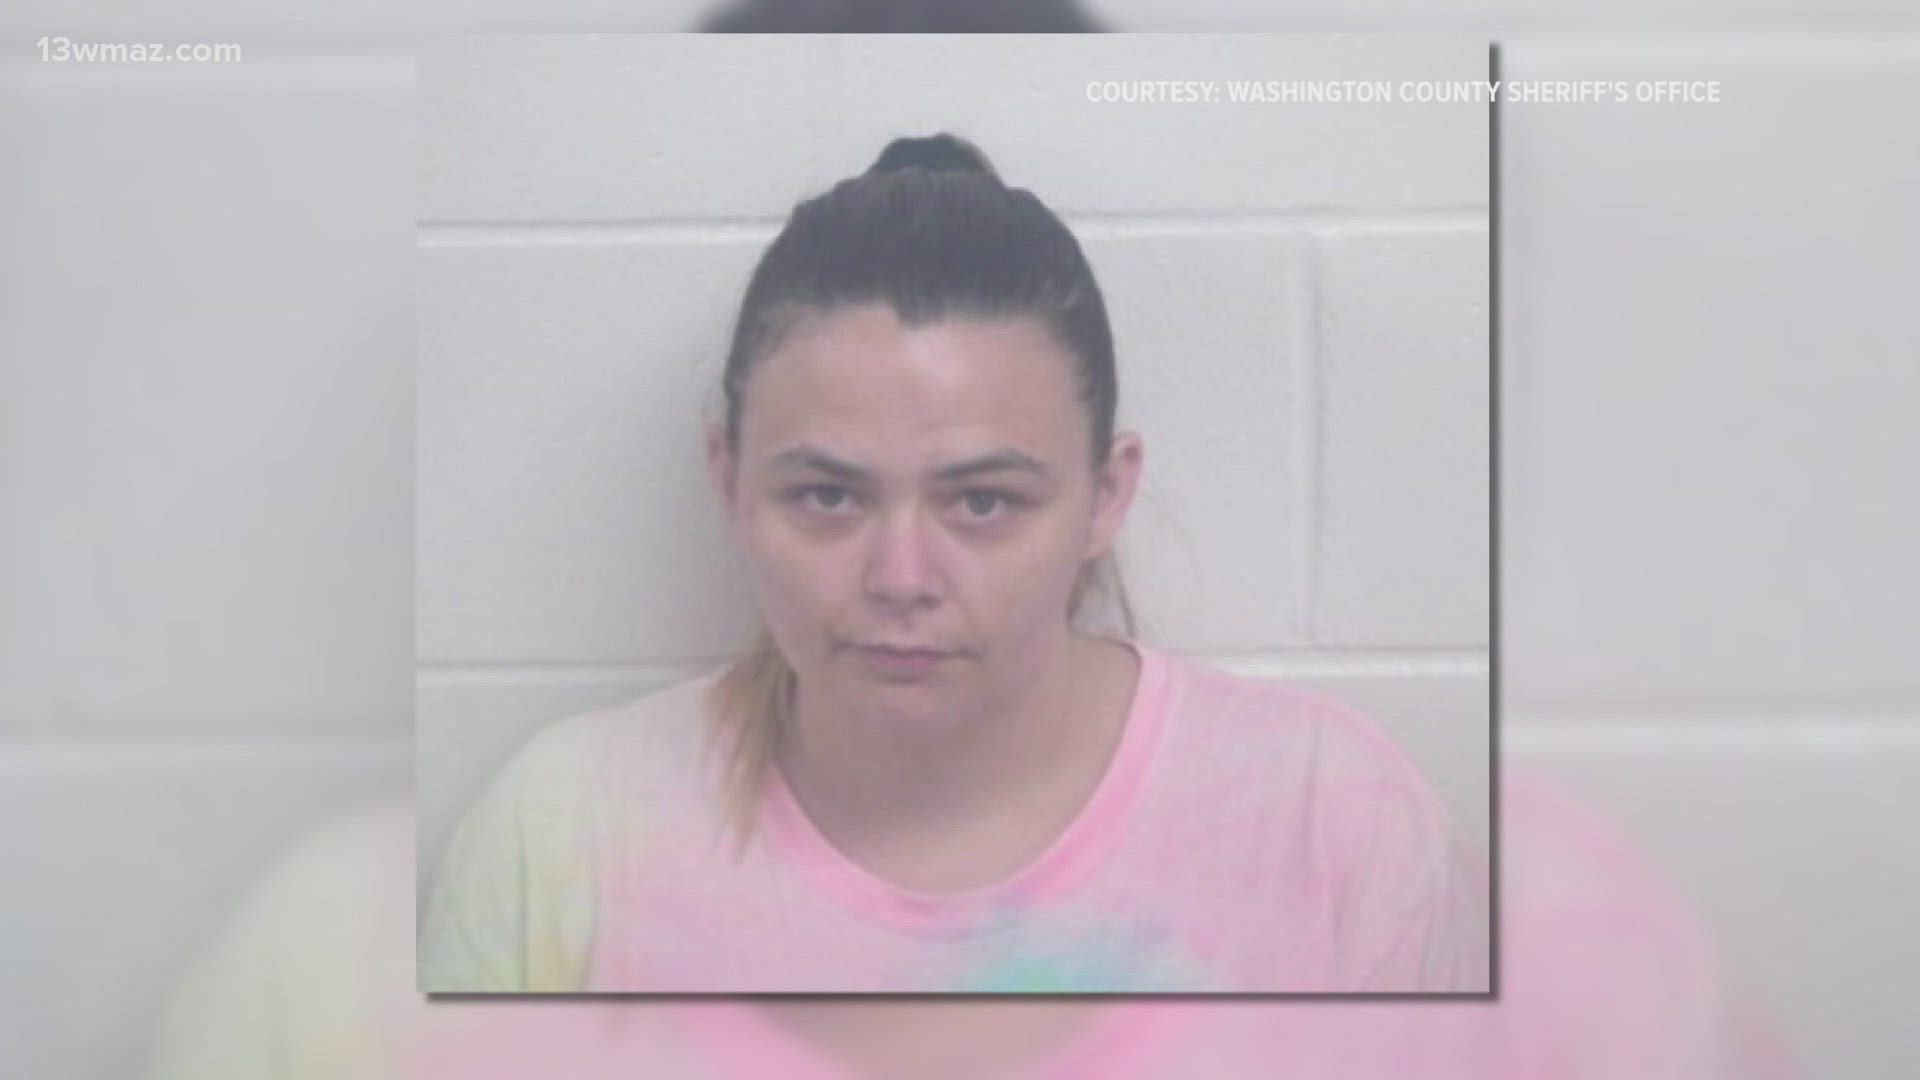 Keepsake business owner, Destiny Magoon, is charged with 12 counts of theft by deception.